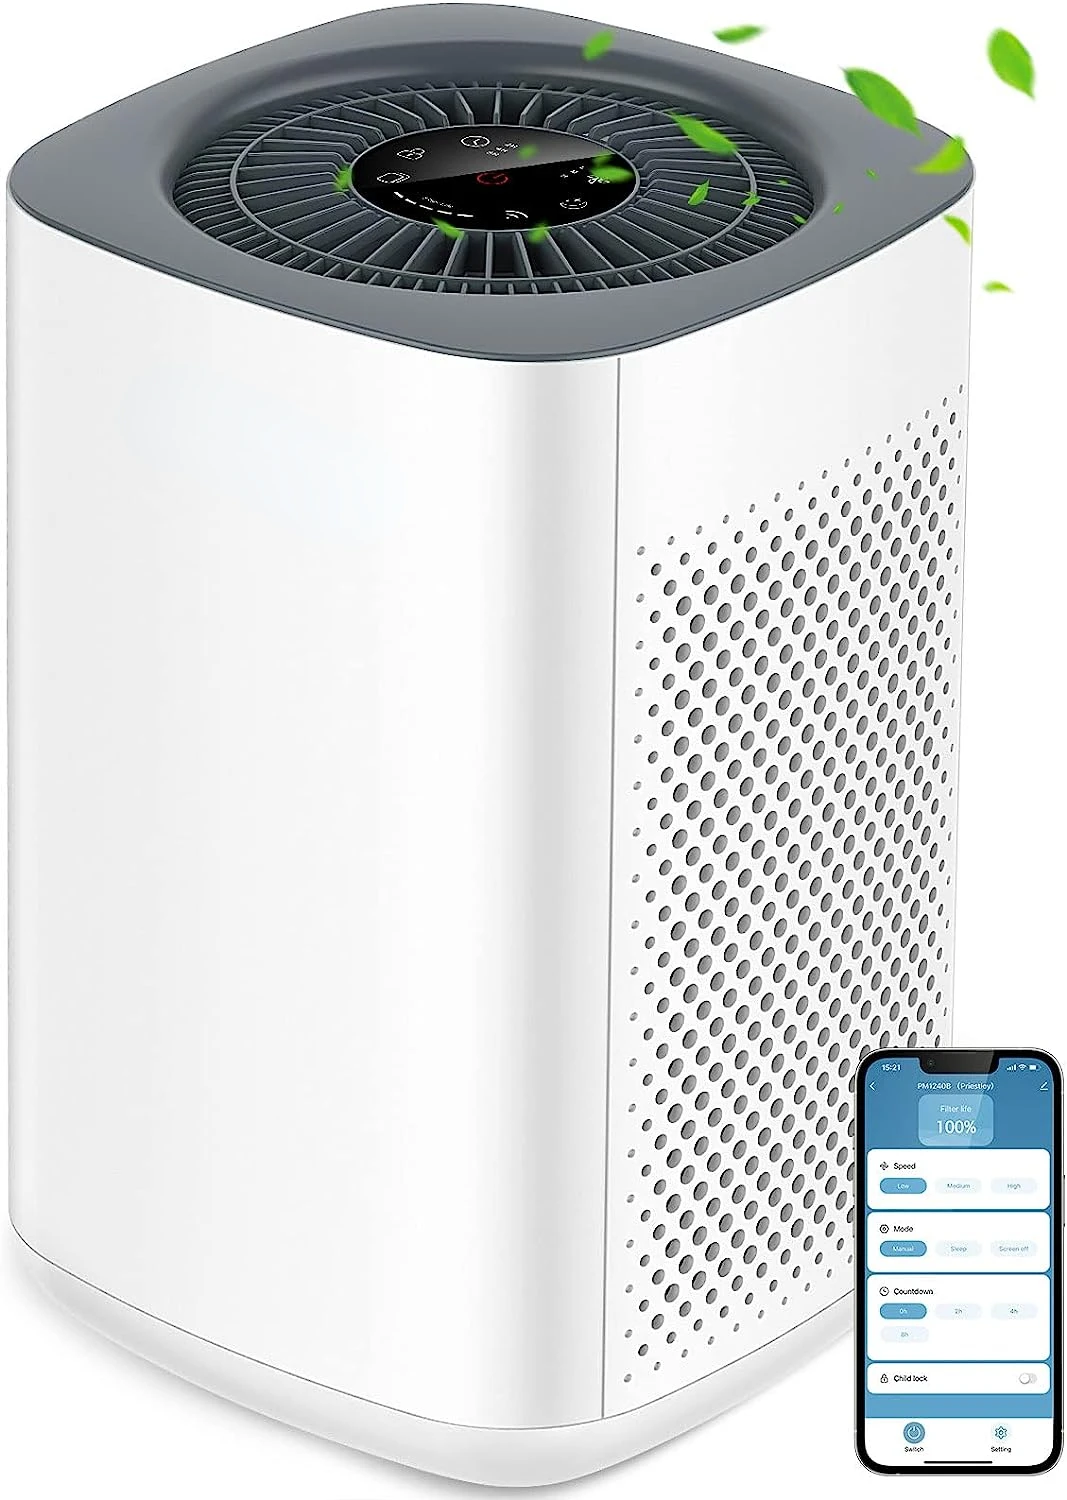 

Purifiers for Home Large Room up to 1000 Ft², Smart WiFi Control, Removes 99.97% of Particles with H13 True HEPA Filter for 3-S